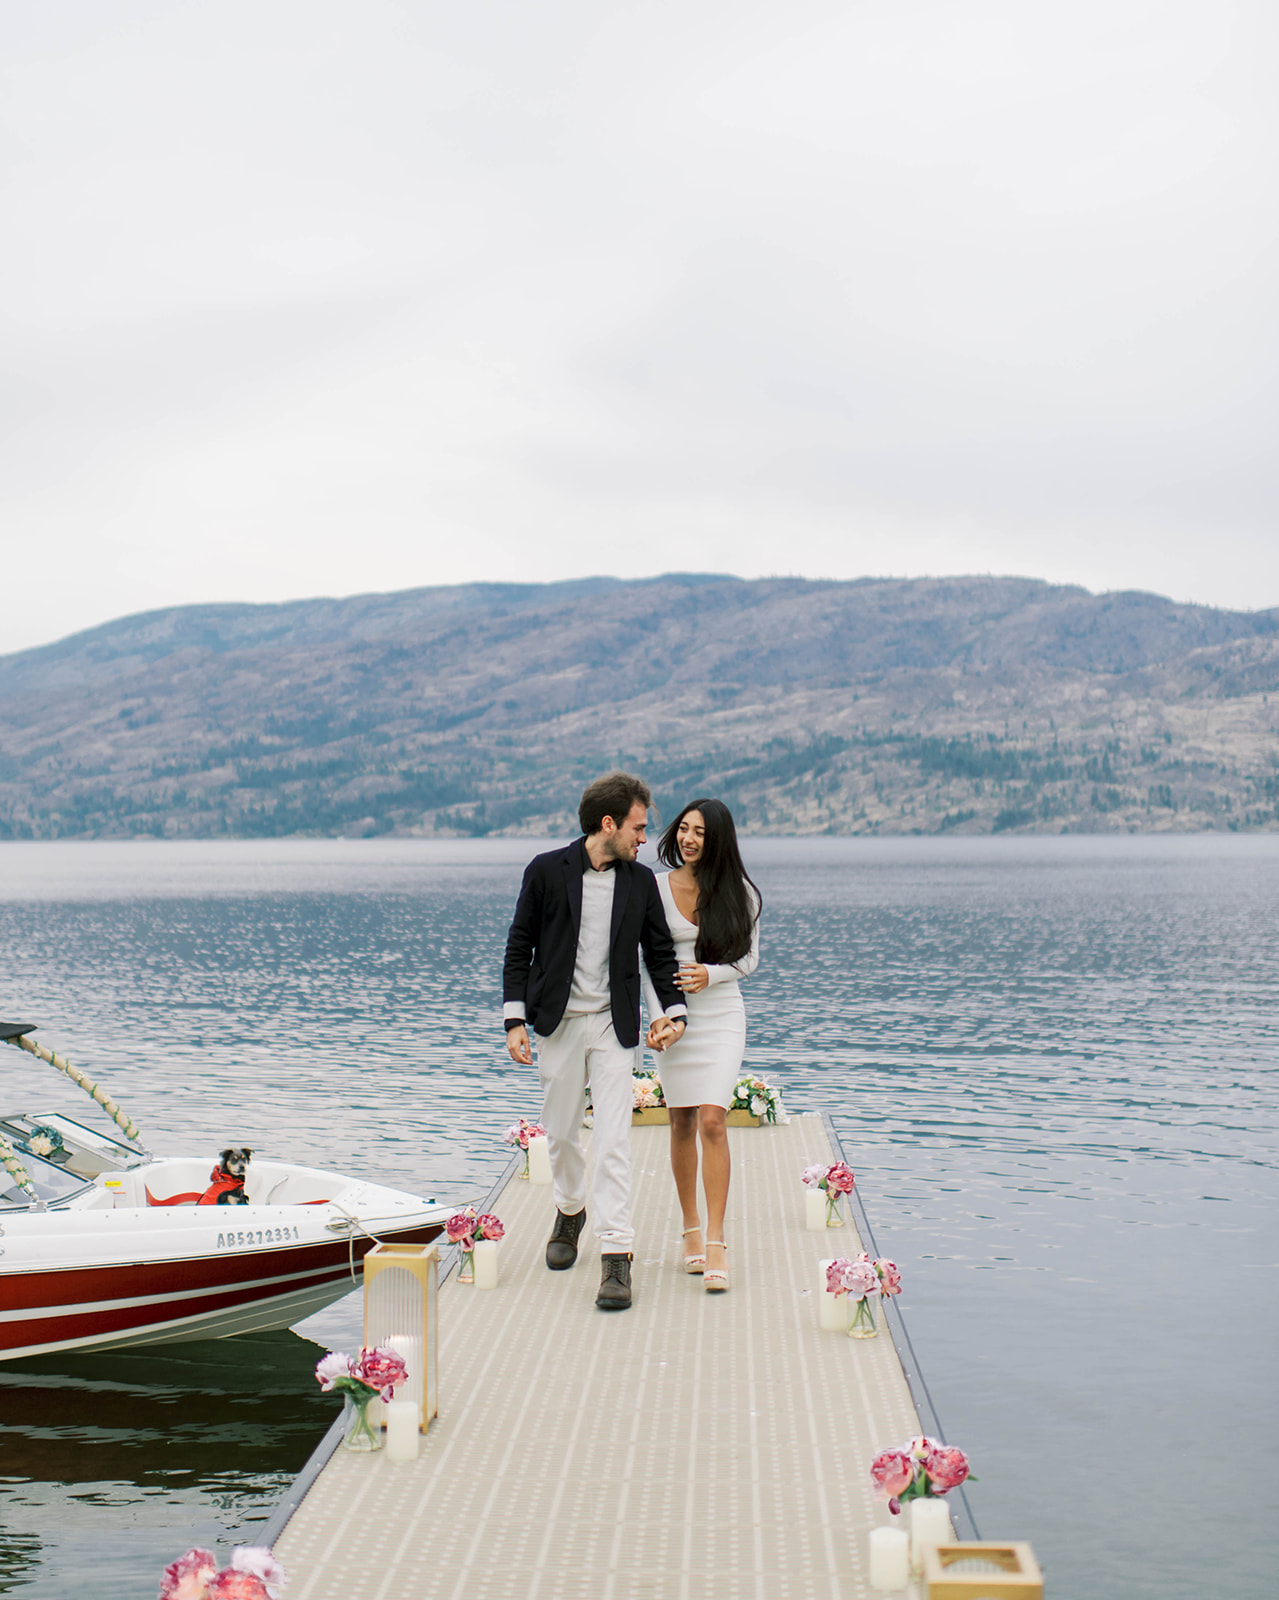 Perfectly Planned Romantic Proposal at Peachland Beach, in the Okanagan Valley, captured on film by Kelowna Wedding Photographer, Minted Photography. - proposal planning, proposal inspiration, summer proposal ideas, surprise proposal, romantic proposal inspiration